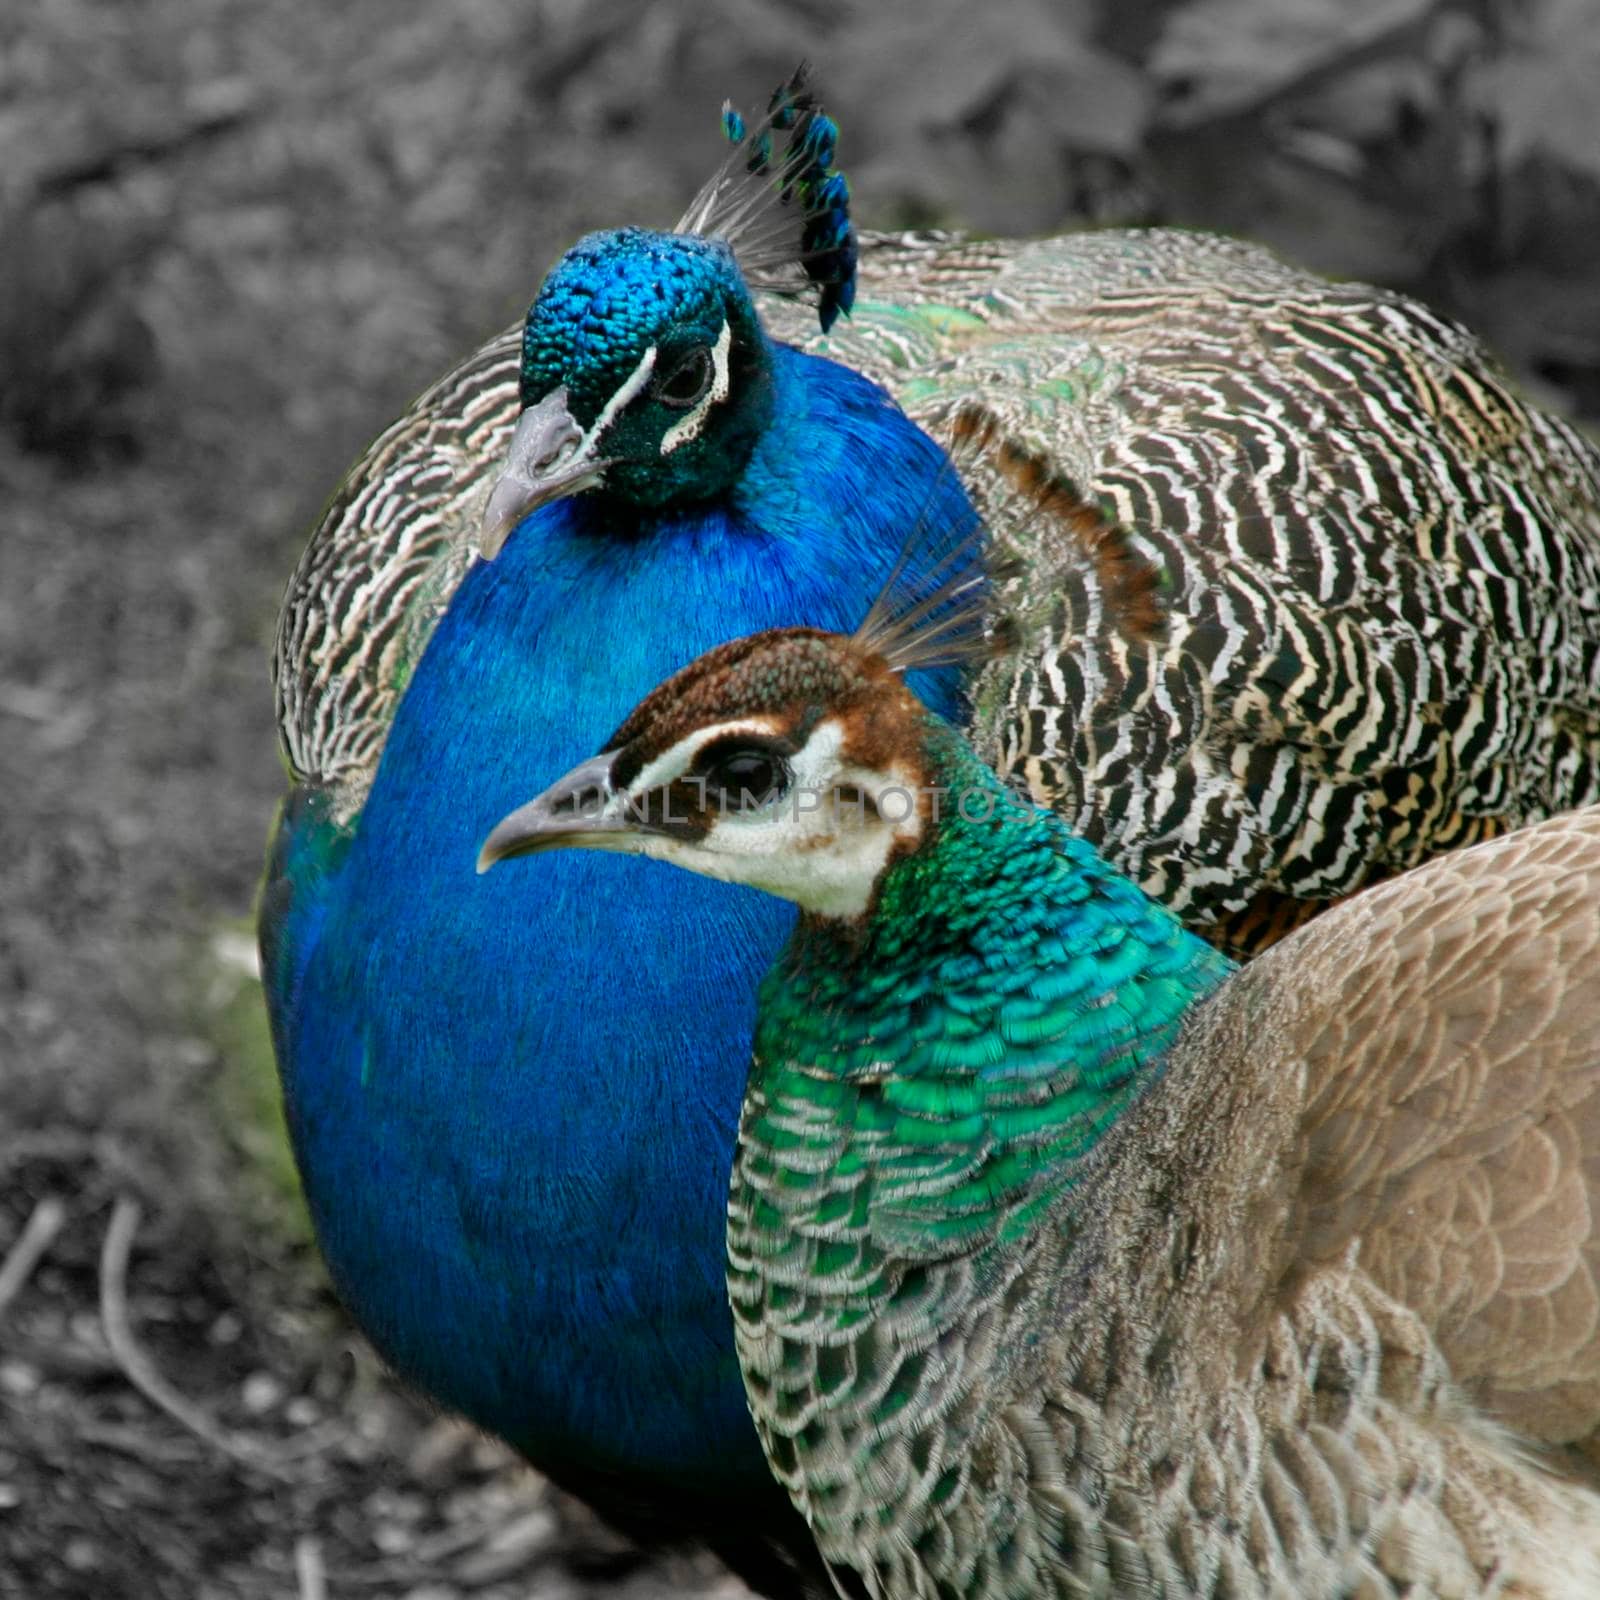 Two peafowl birds, a peacock and a peahen. by Bwise